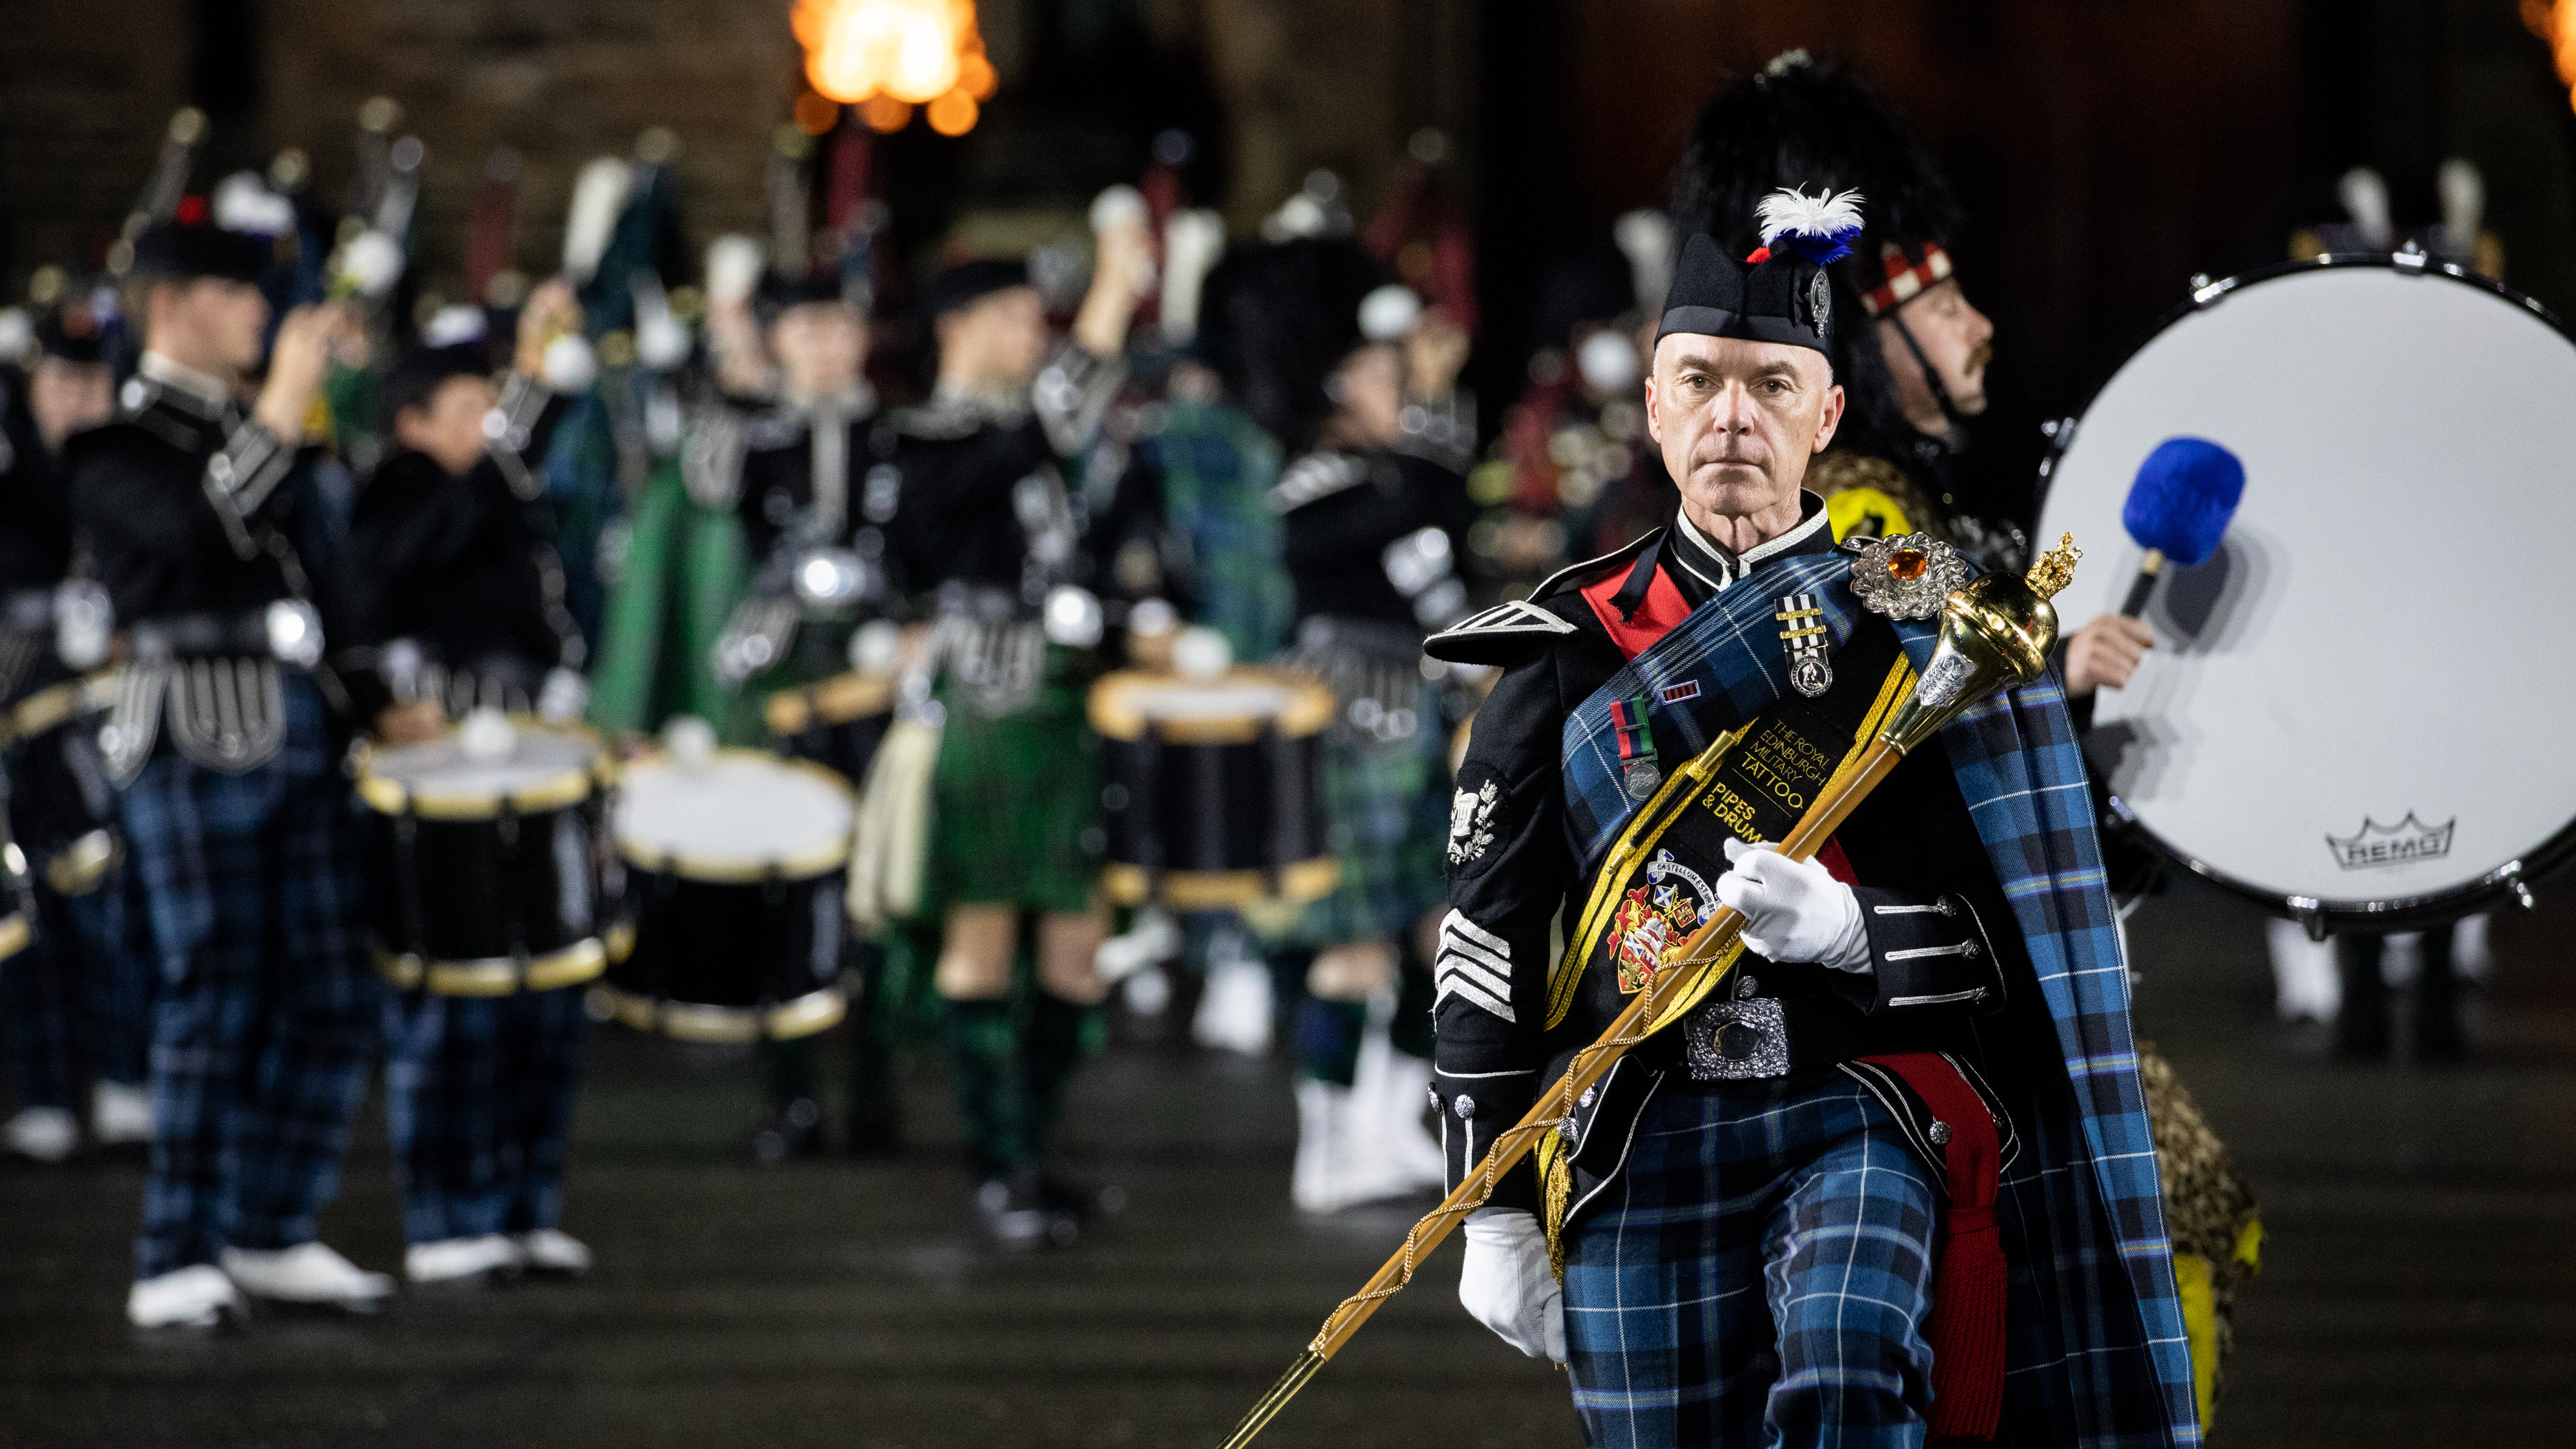 Image shows Band performing in Scottish tartans.